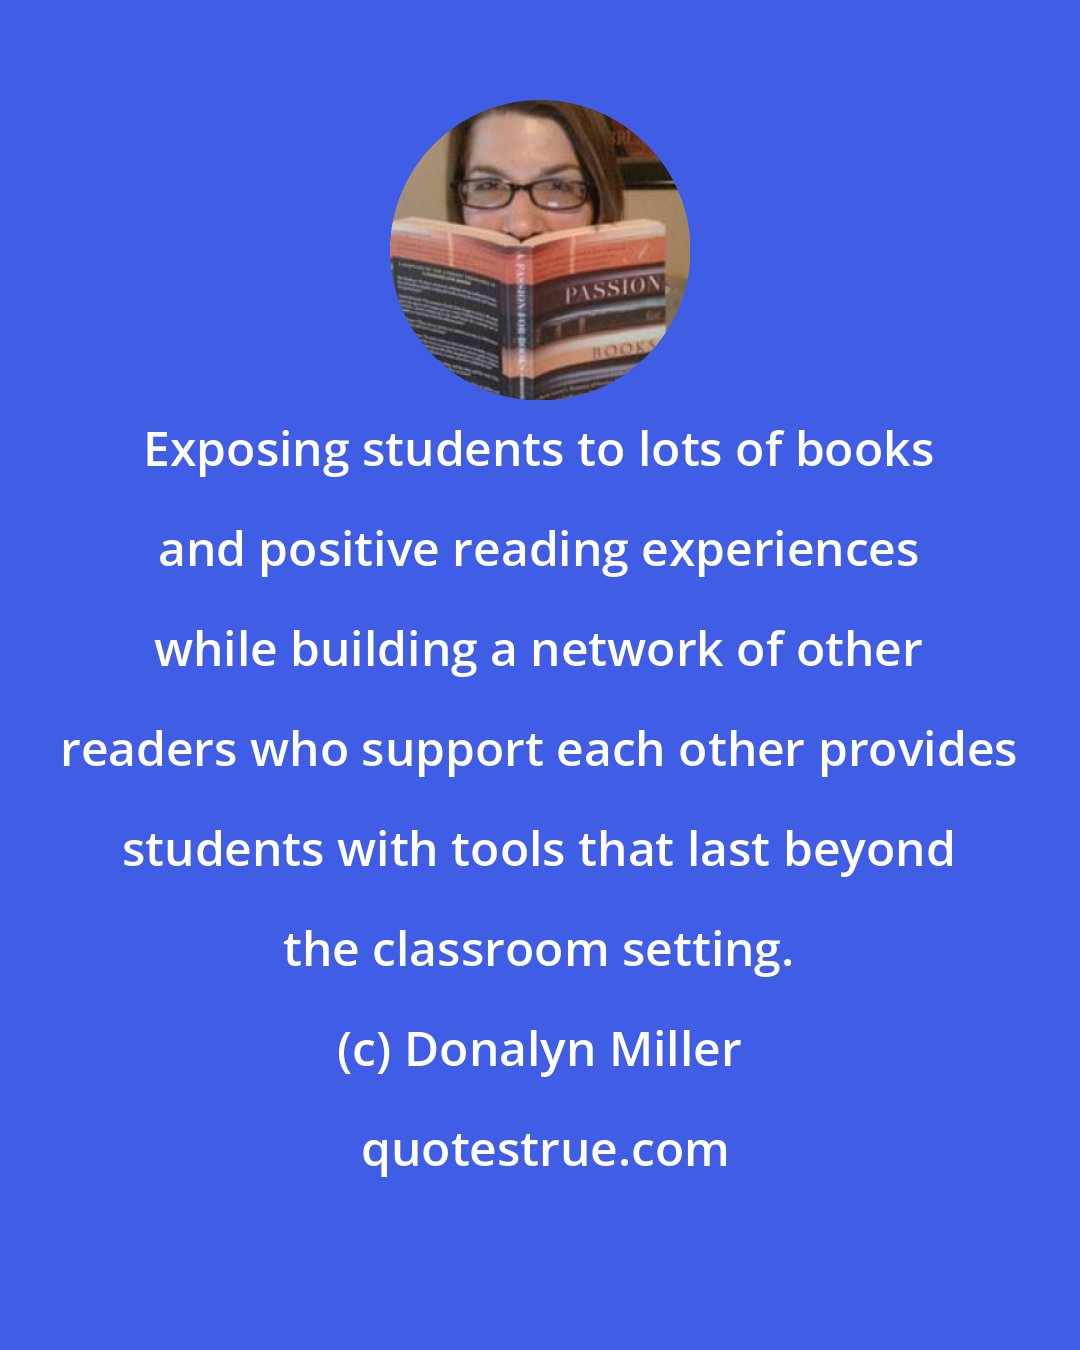 Donalyn Miller: Exposing students to lots of books and positive reading experiences while building a network of other readers who support each other provides students with tools that last beyond the classroom setting.